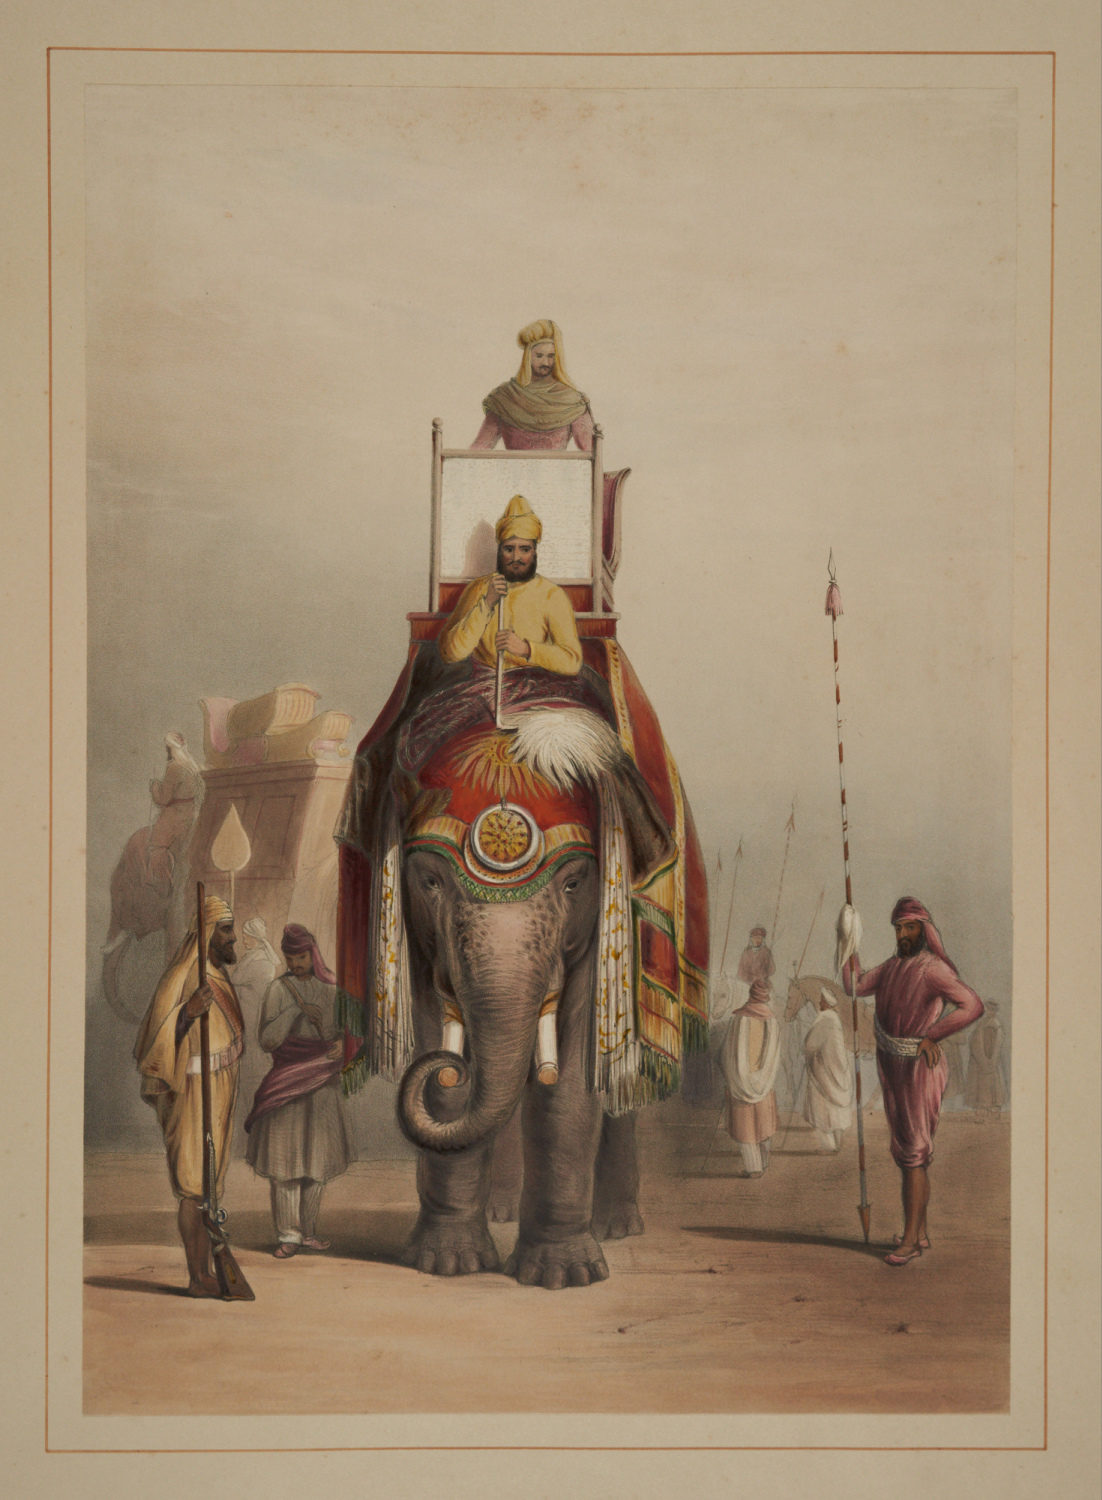 Emily Eden, The Rajah of Patiala (the largest Sikh principality) on his State elephant, 1844. Hand-painted chromolithograph on paper. The Khanuja Family.